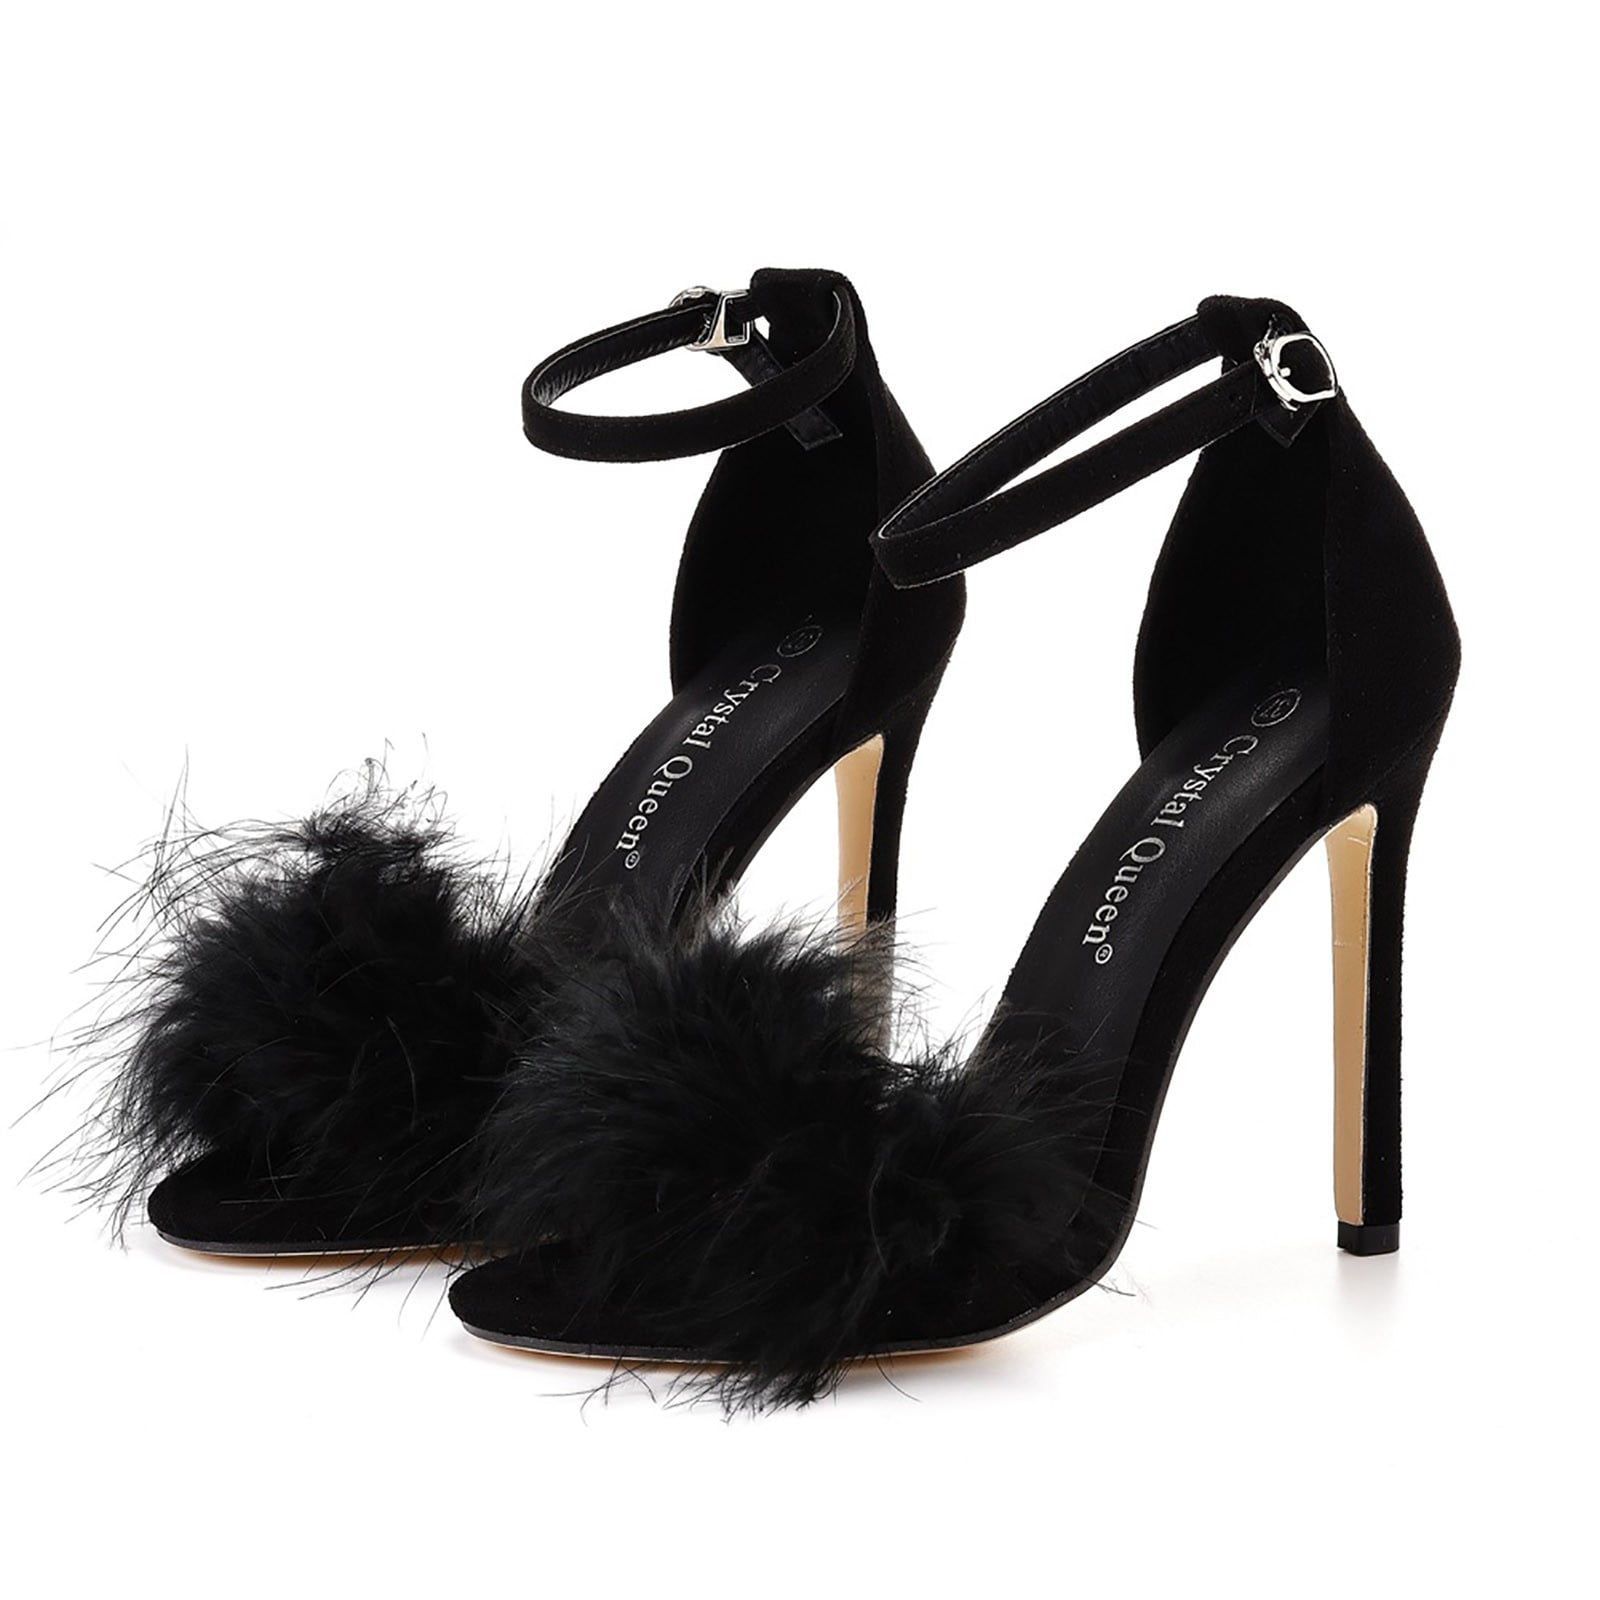 Black Feathered lace heels – Sassy Curves Shoetique and More